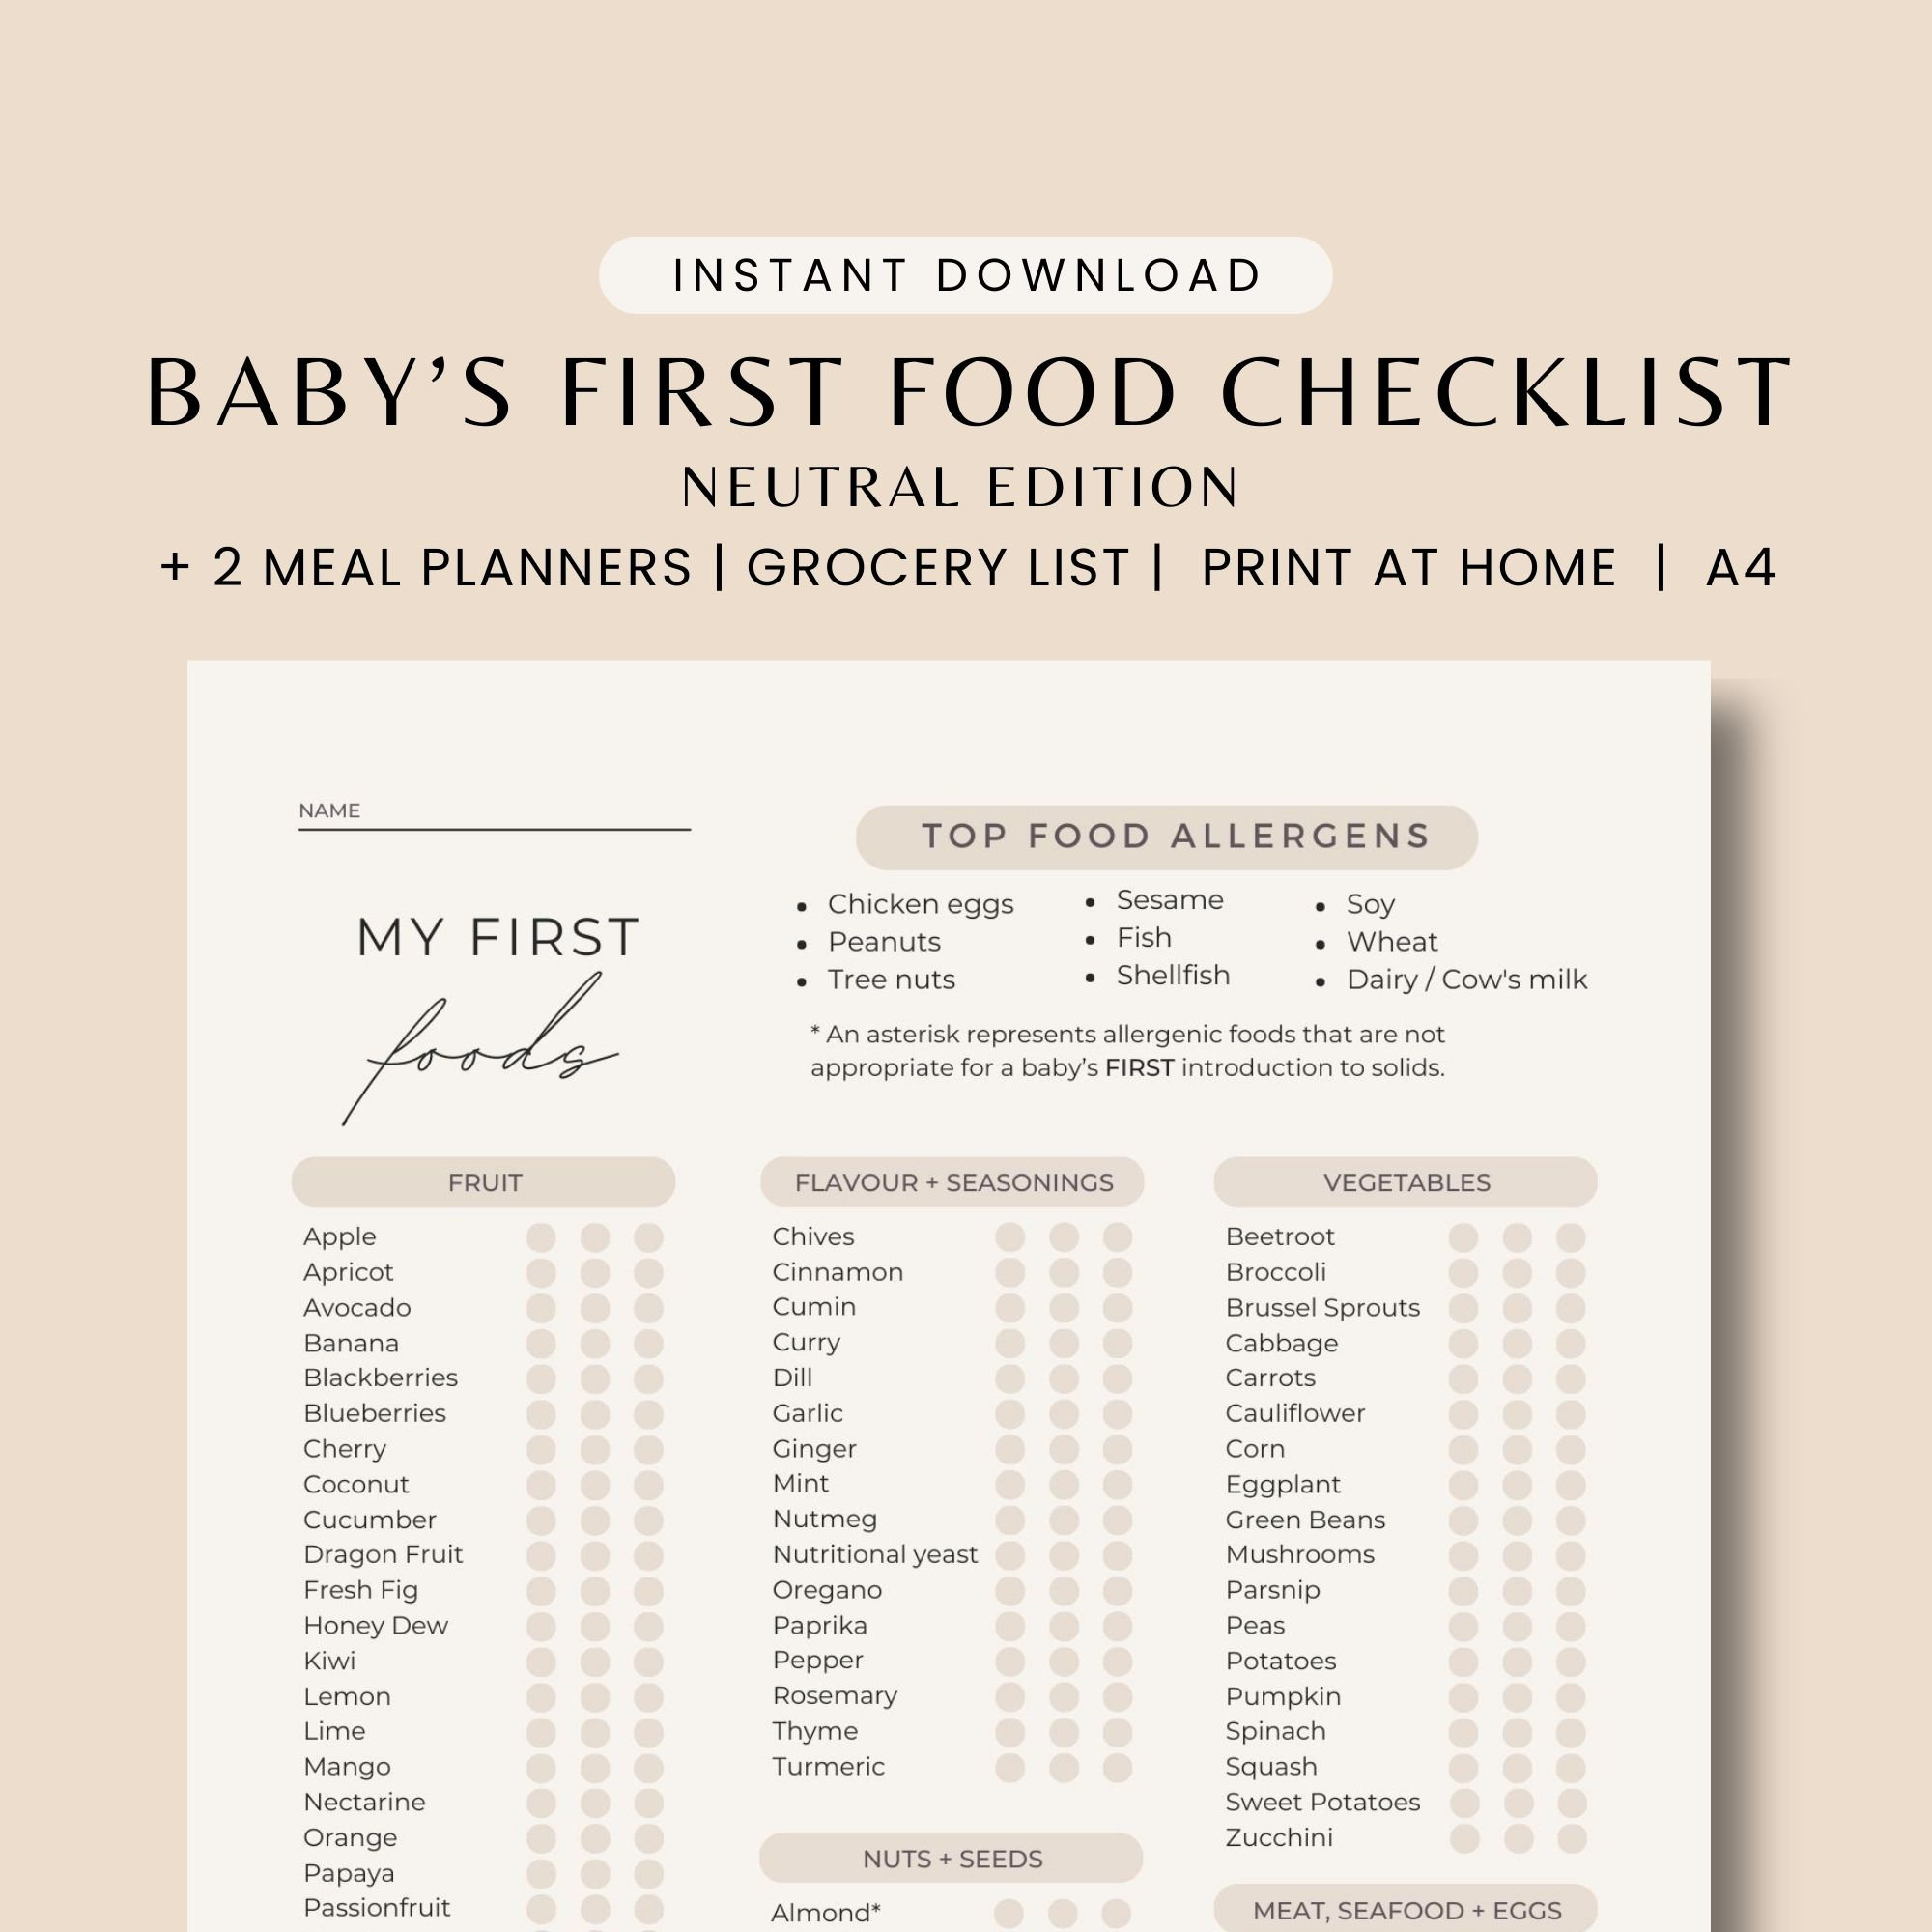 101 Foods Checklist Fridge Magnet for Baby Led Weaning From 101 Before One  